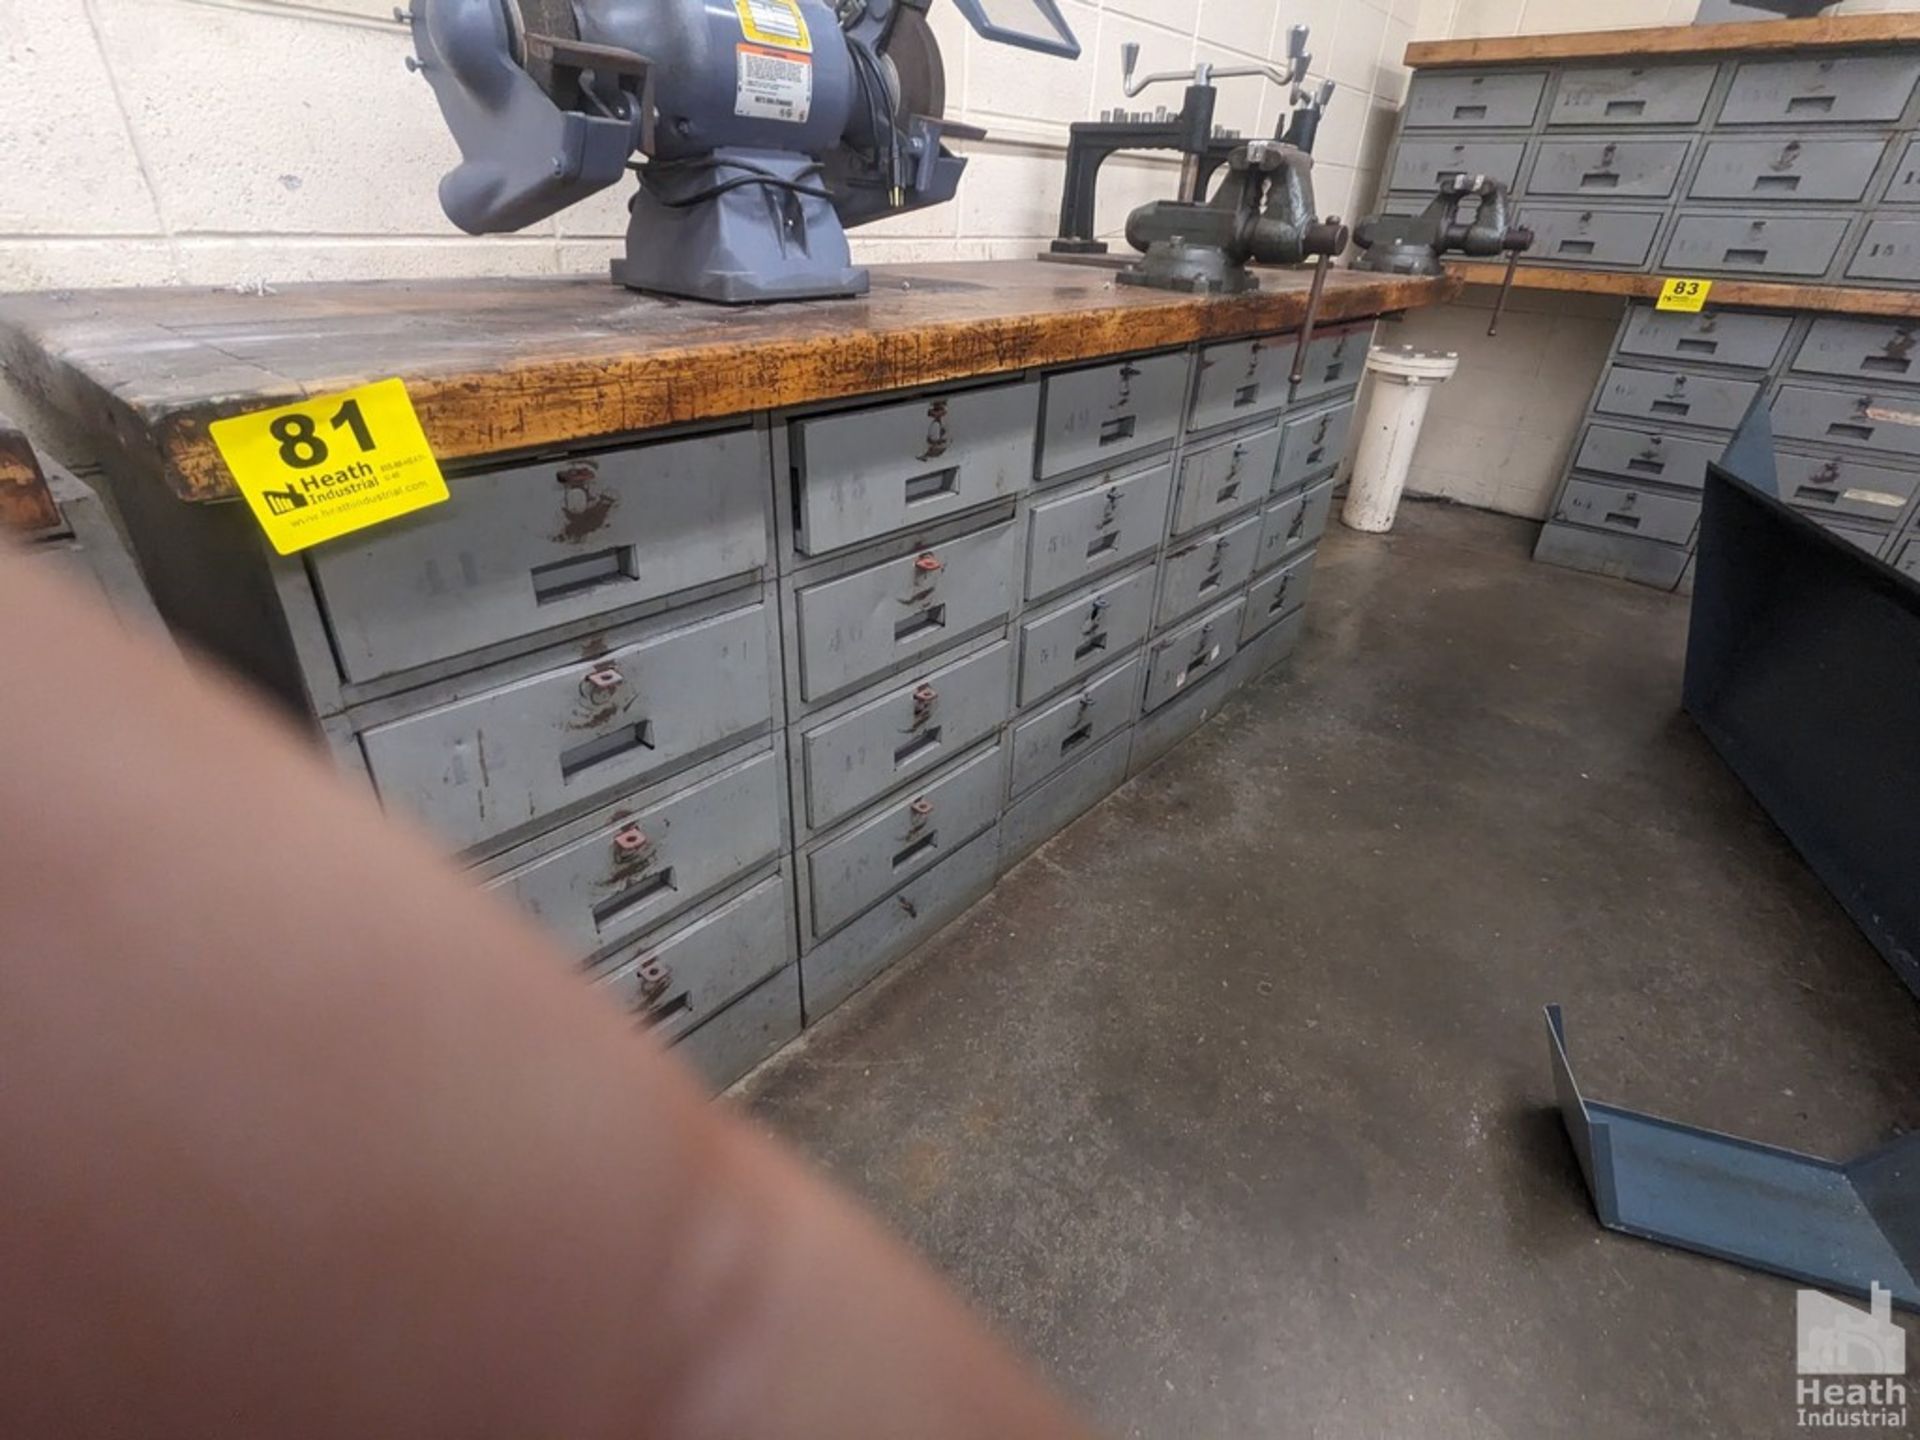 CABINET BASED WORKBENCH WITH DRAWERS AND TWO 4" BULLET STYLE VISES 8' X 2' Loading Fee :$75